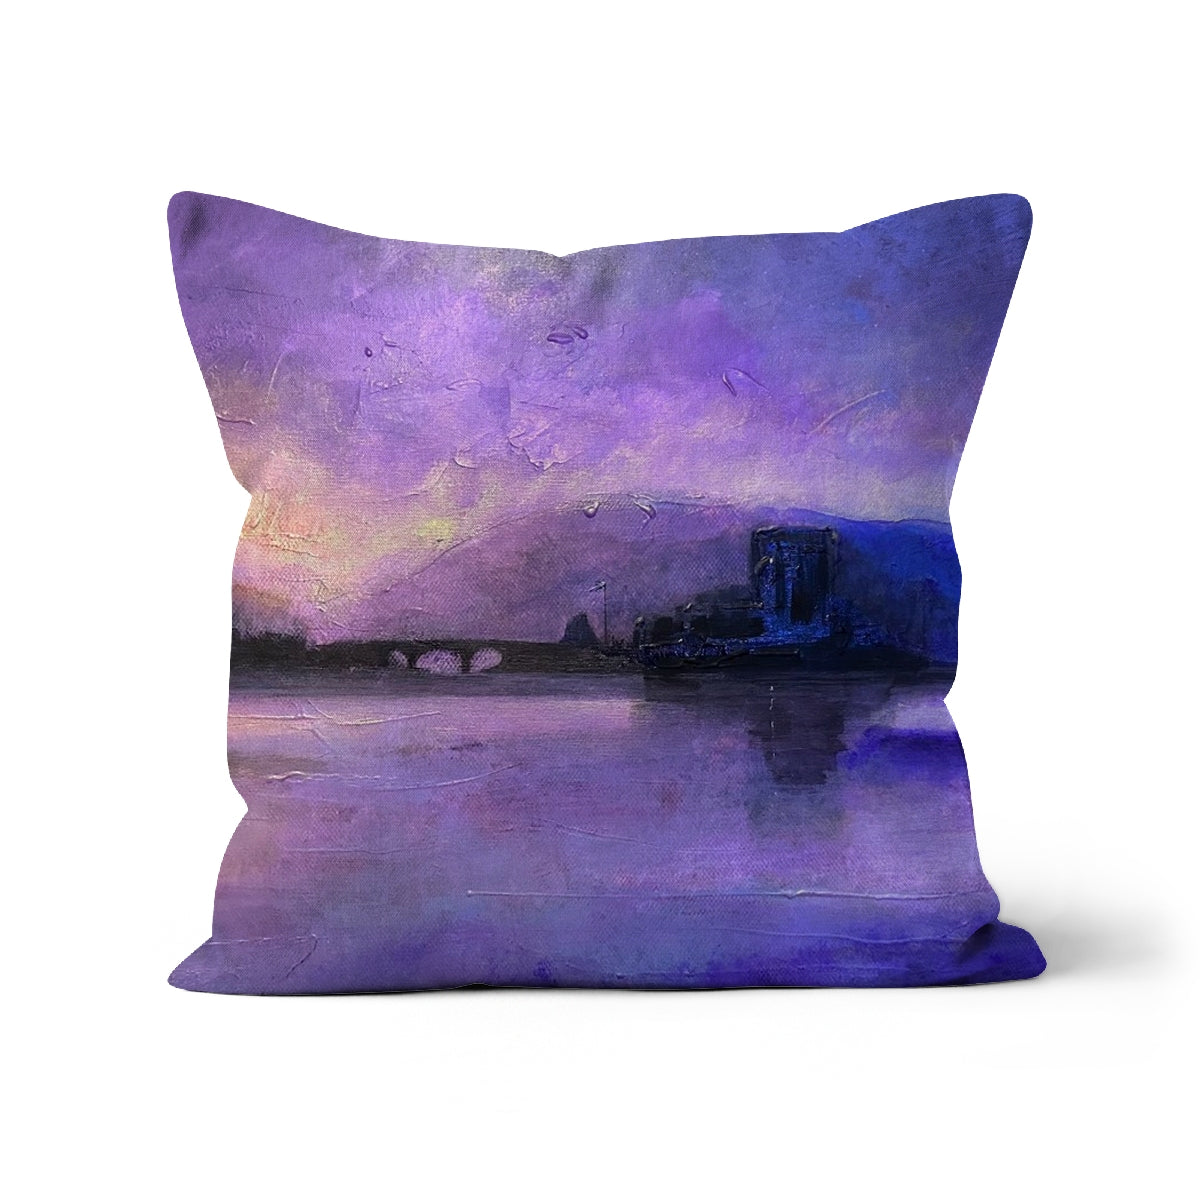 Eilean Donan Castle Moonset Art Gifts Cushion-Cushions-Historic & Iconic Scotland Art Gallery-Linen-16"x16"-Paintings, Prints, Homeware, Art Gifts From Scotland By Scottish Artist Kevin Hunter